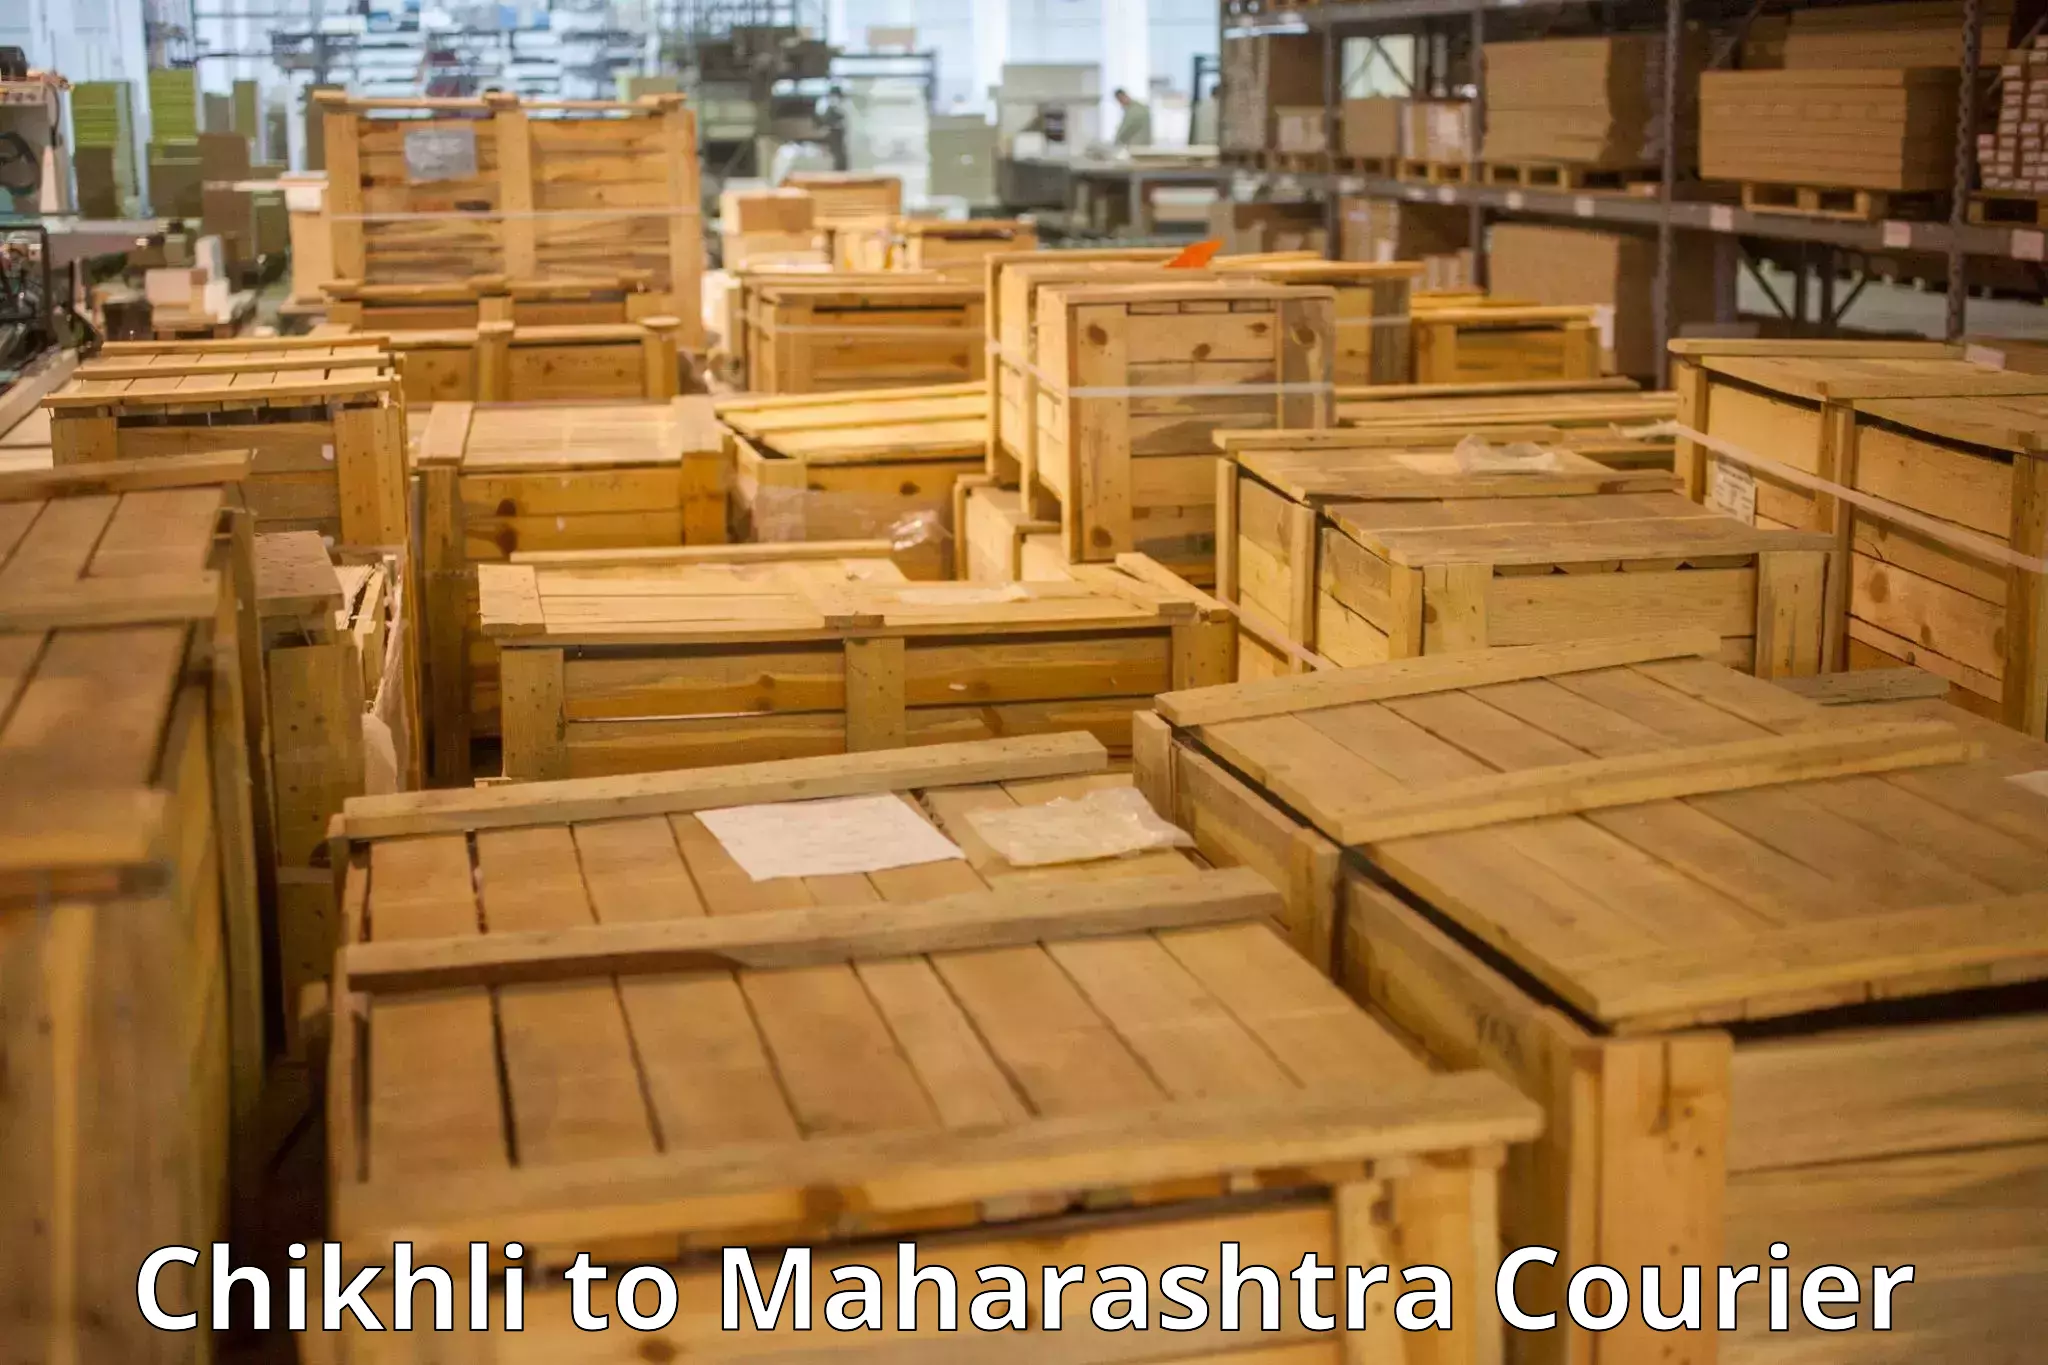 Baggage shipping schedule Chikhli to Solapur